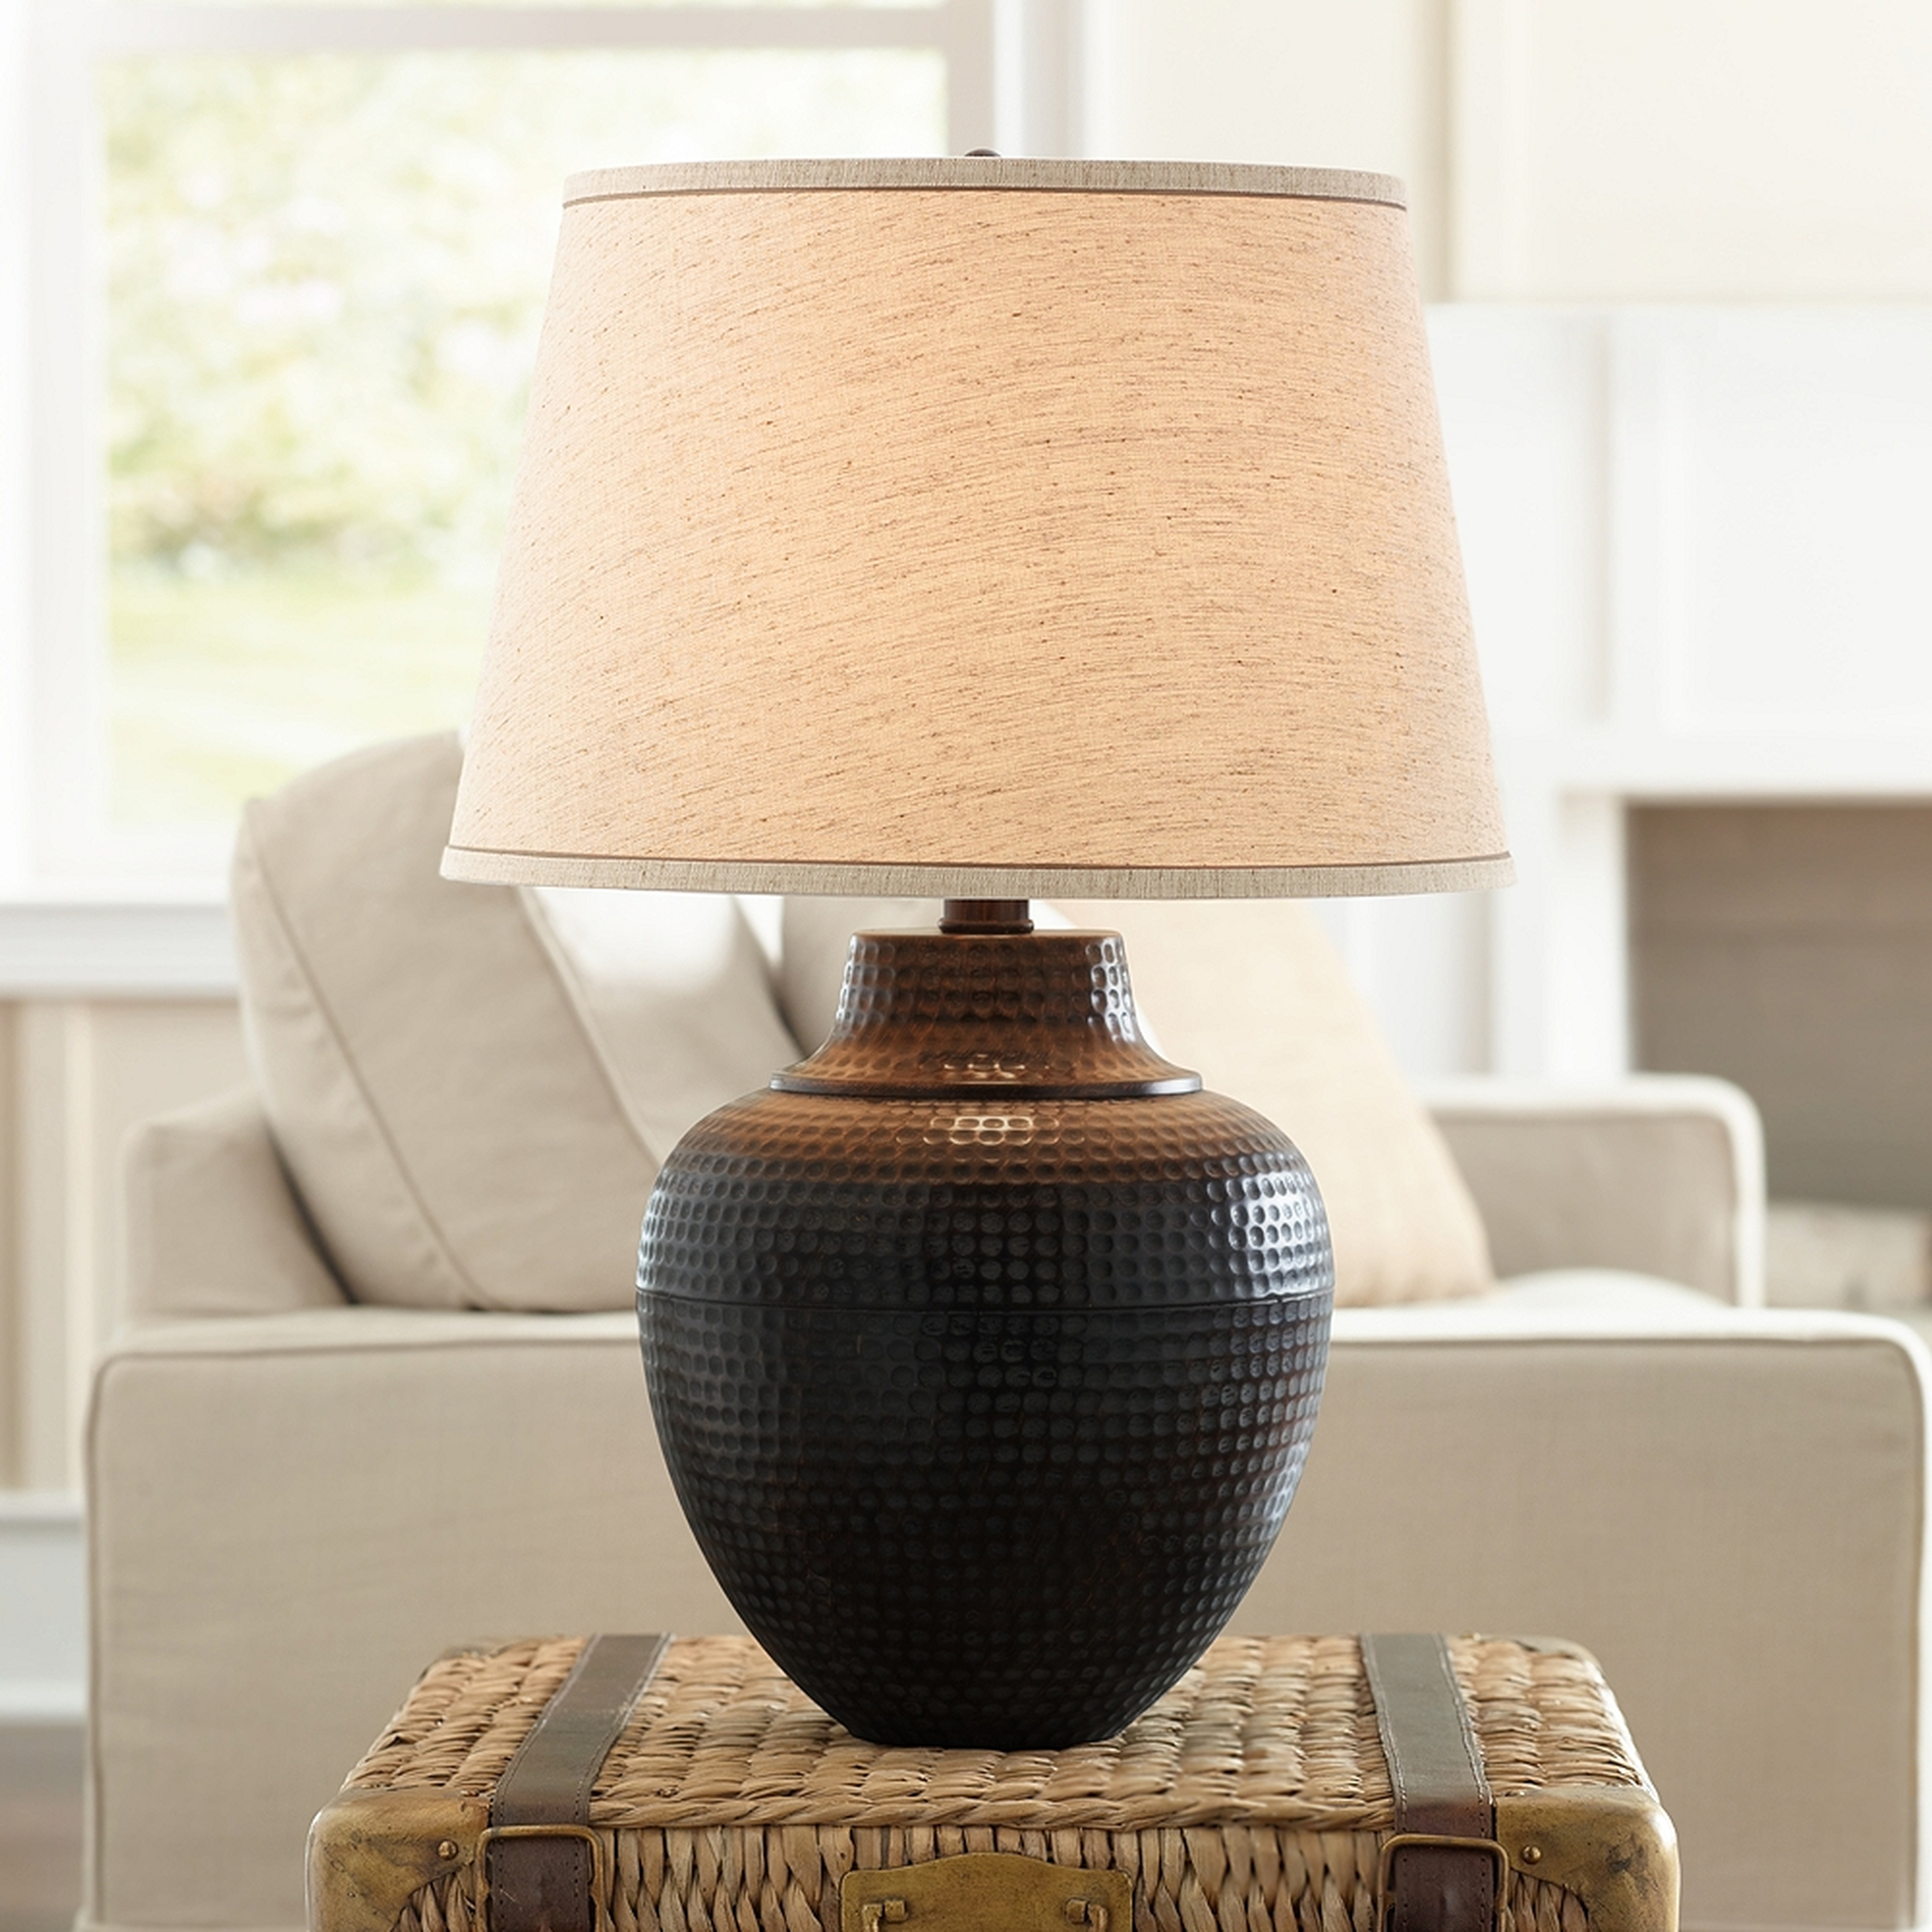 Brighton Hammered Pot Bronze Table Lamp with Table Top Dimmer - Style # 89M06 - Lamps Plus